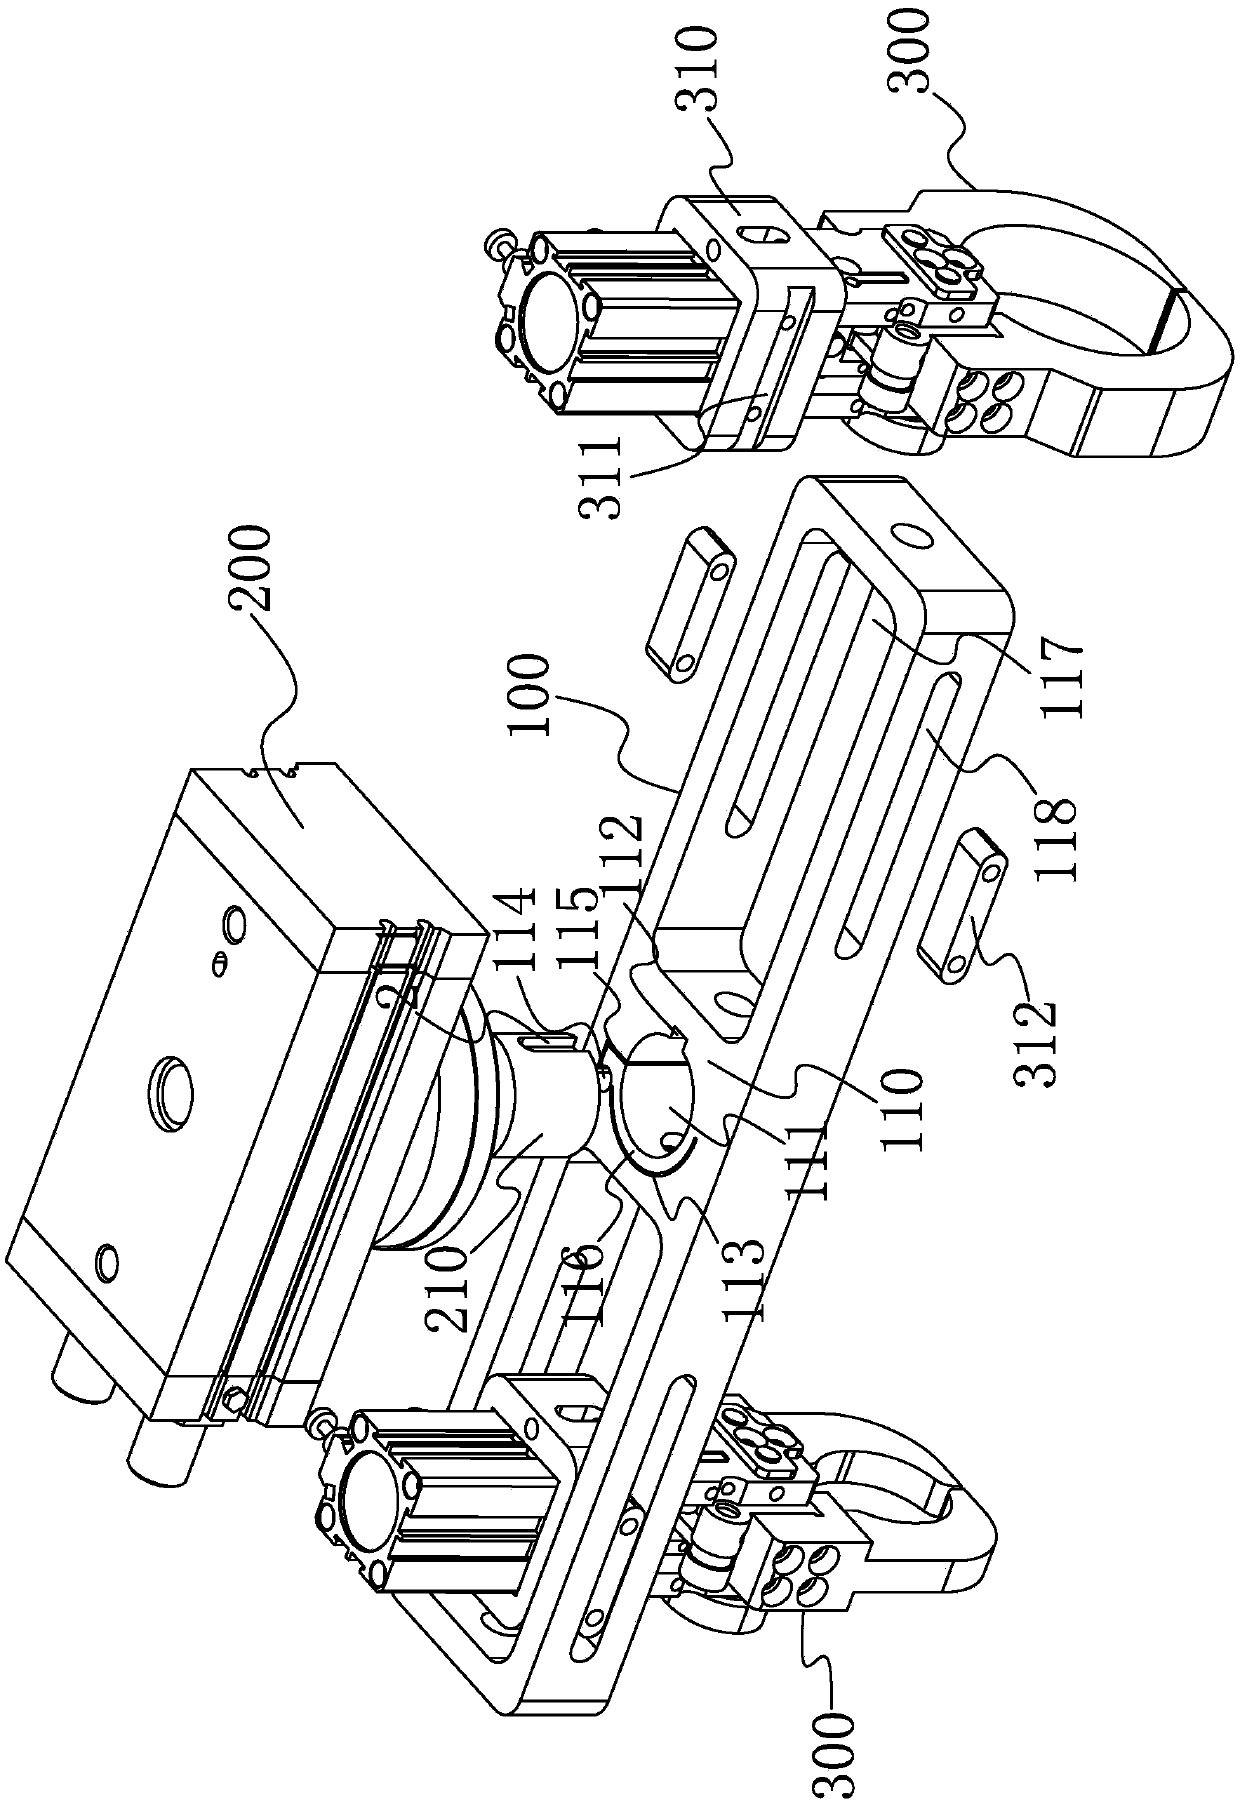 Rotatable mechanical gripper device